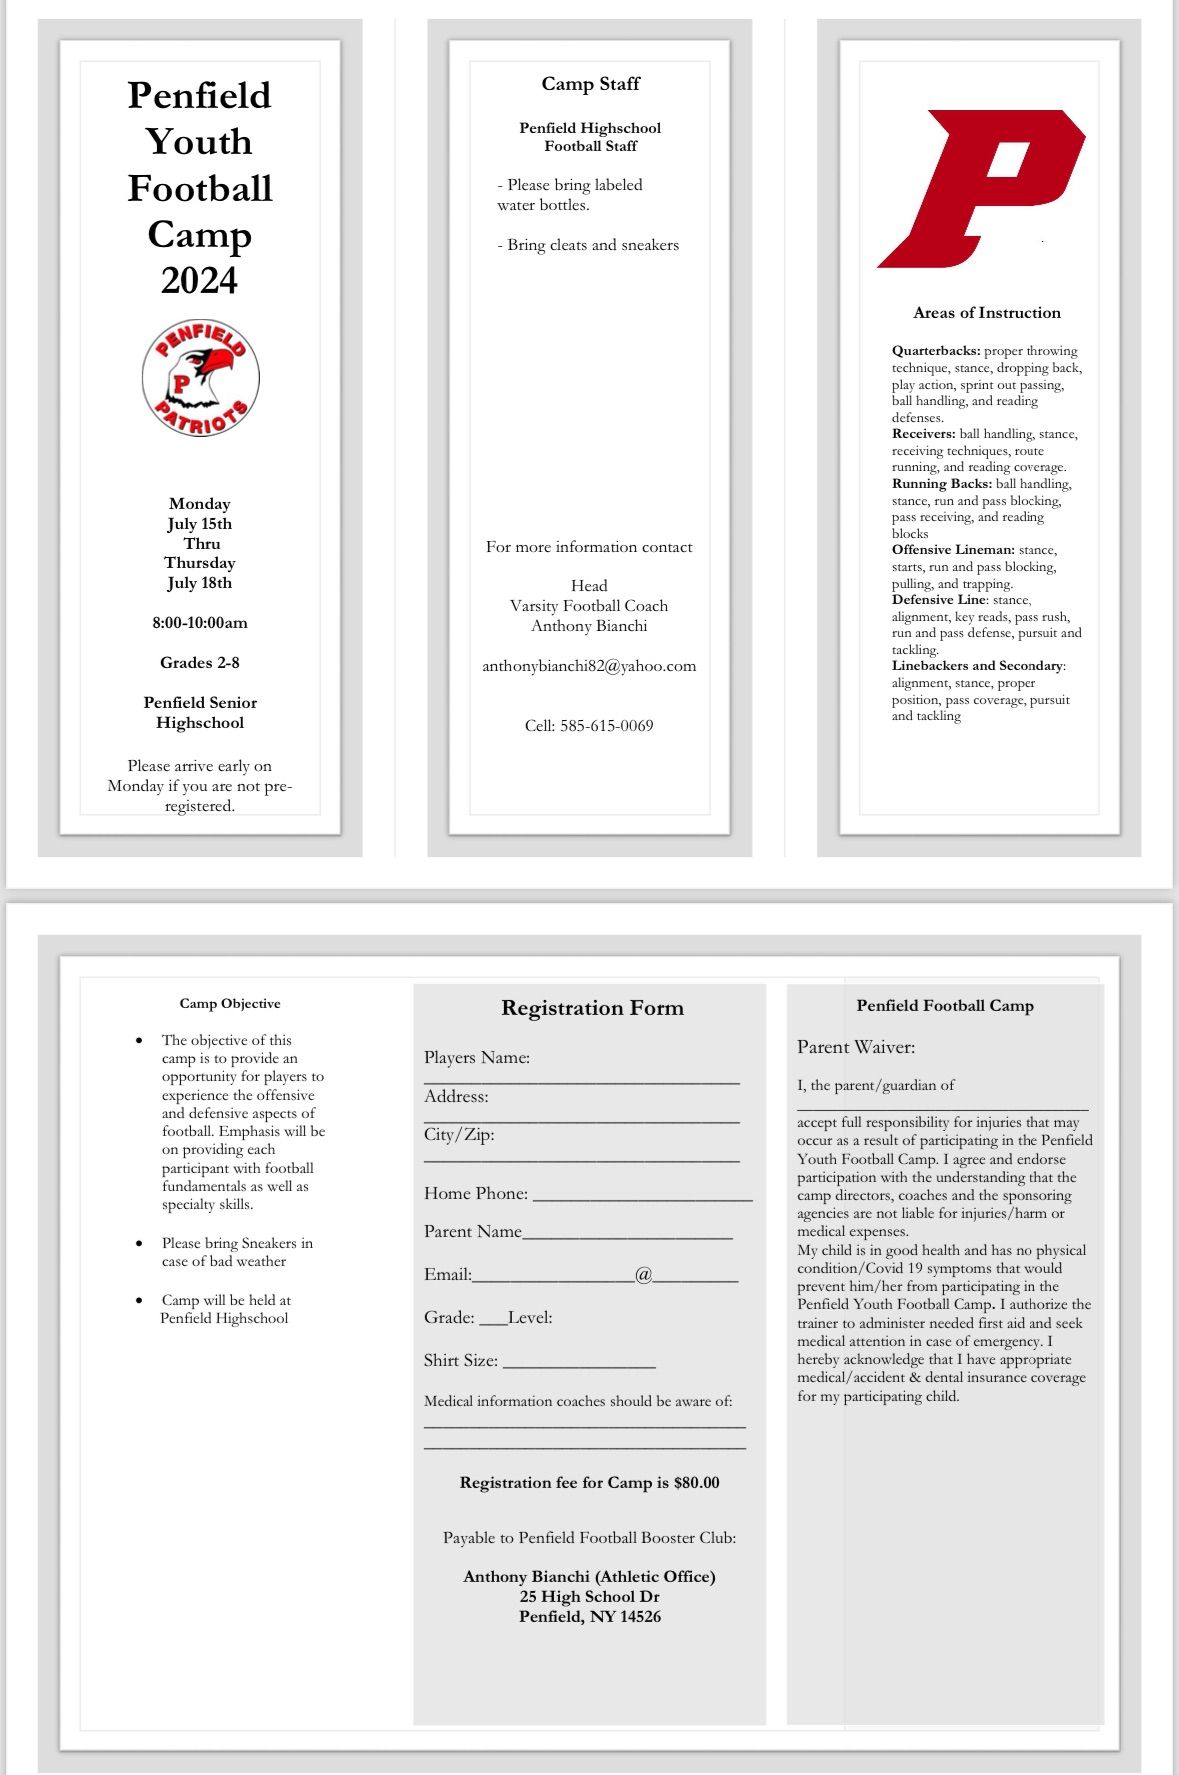 2024 Penfield Youth Football Camp Registration